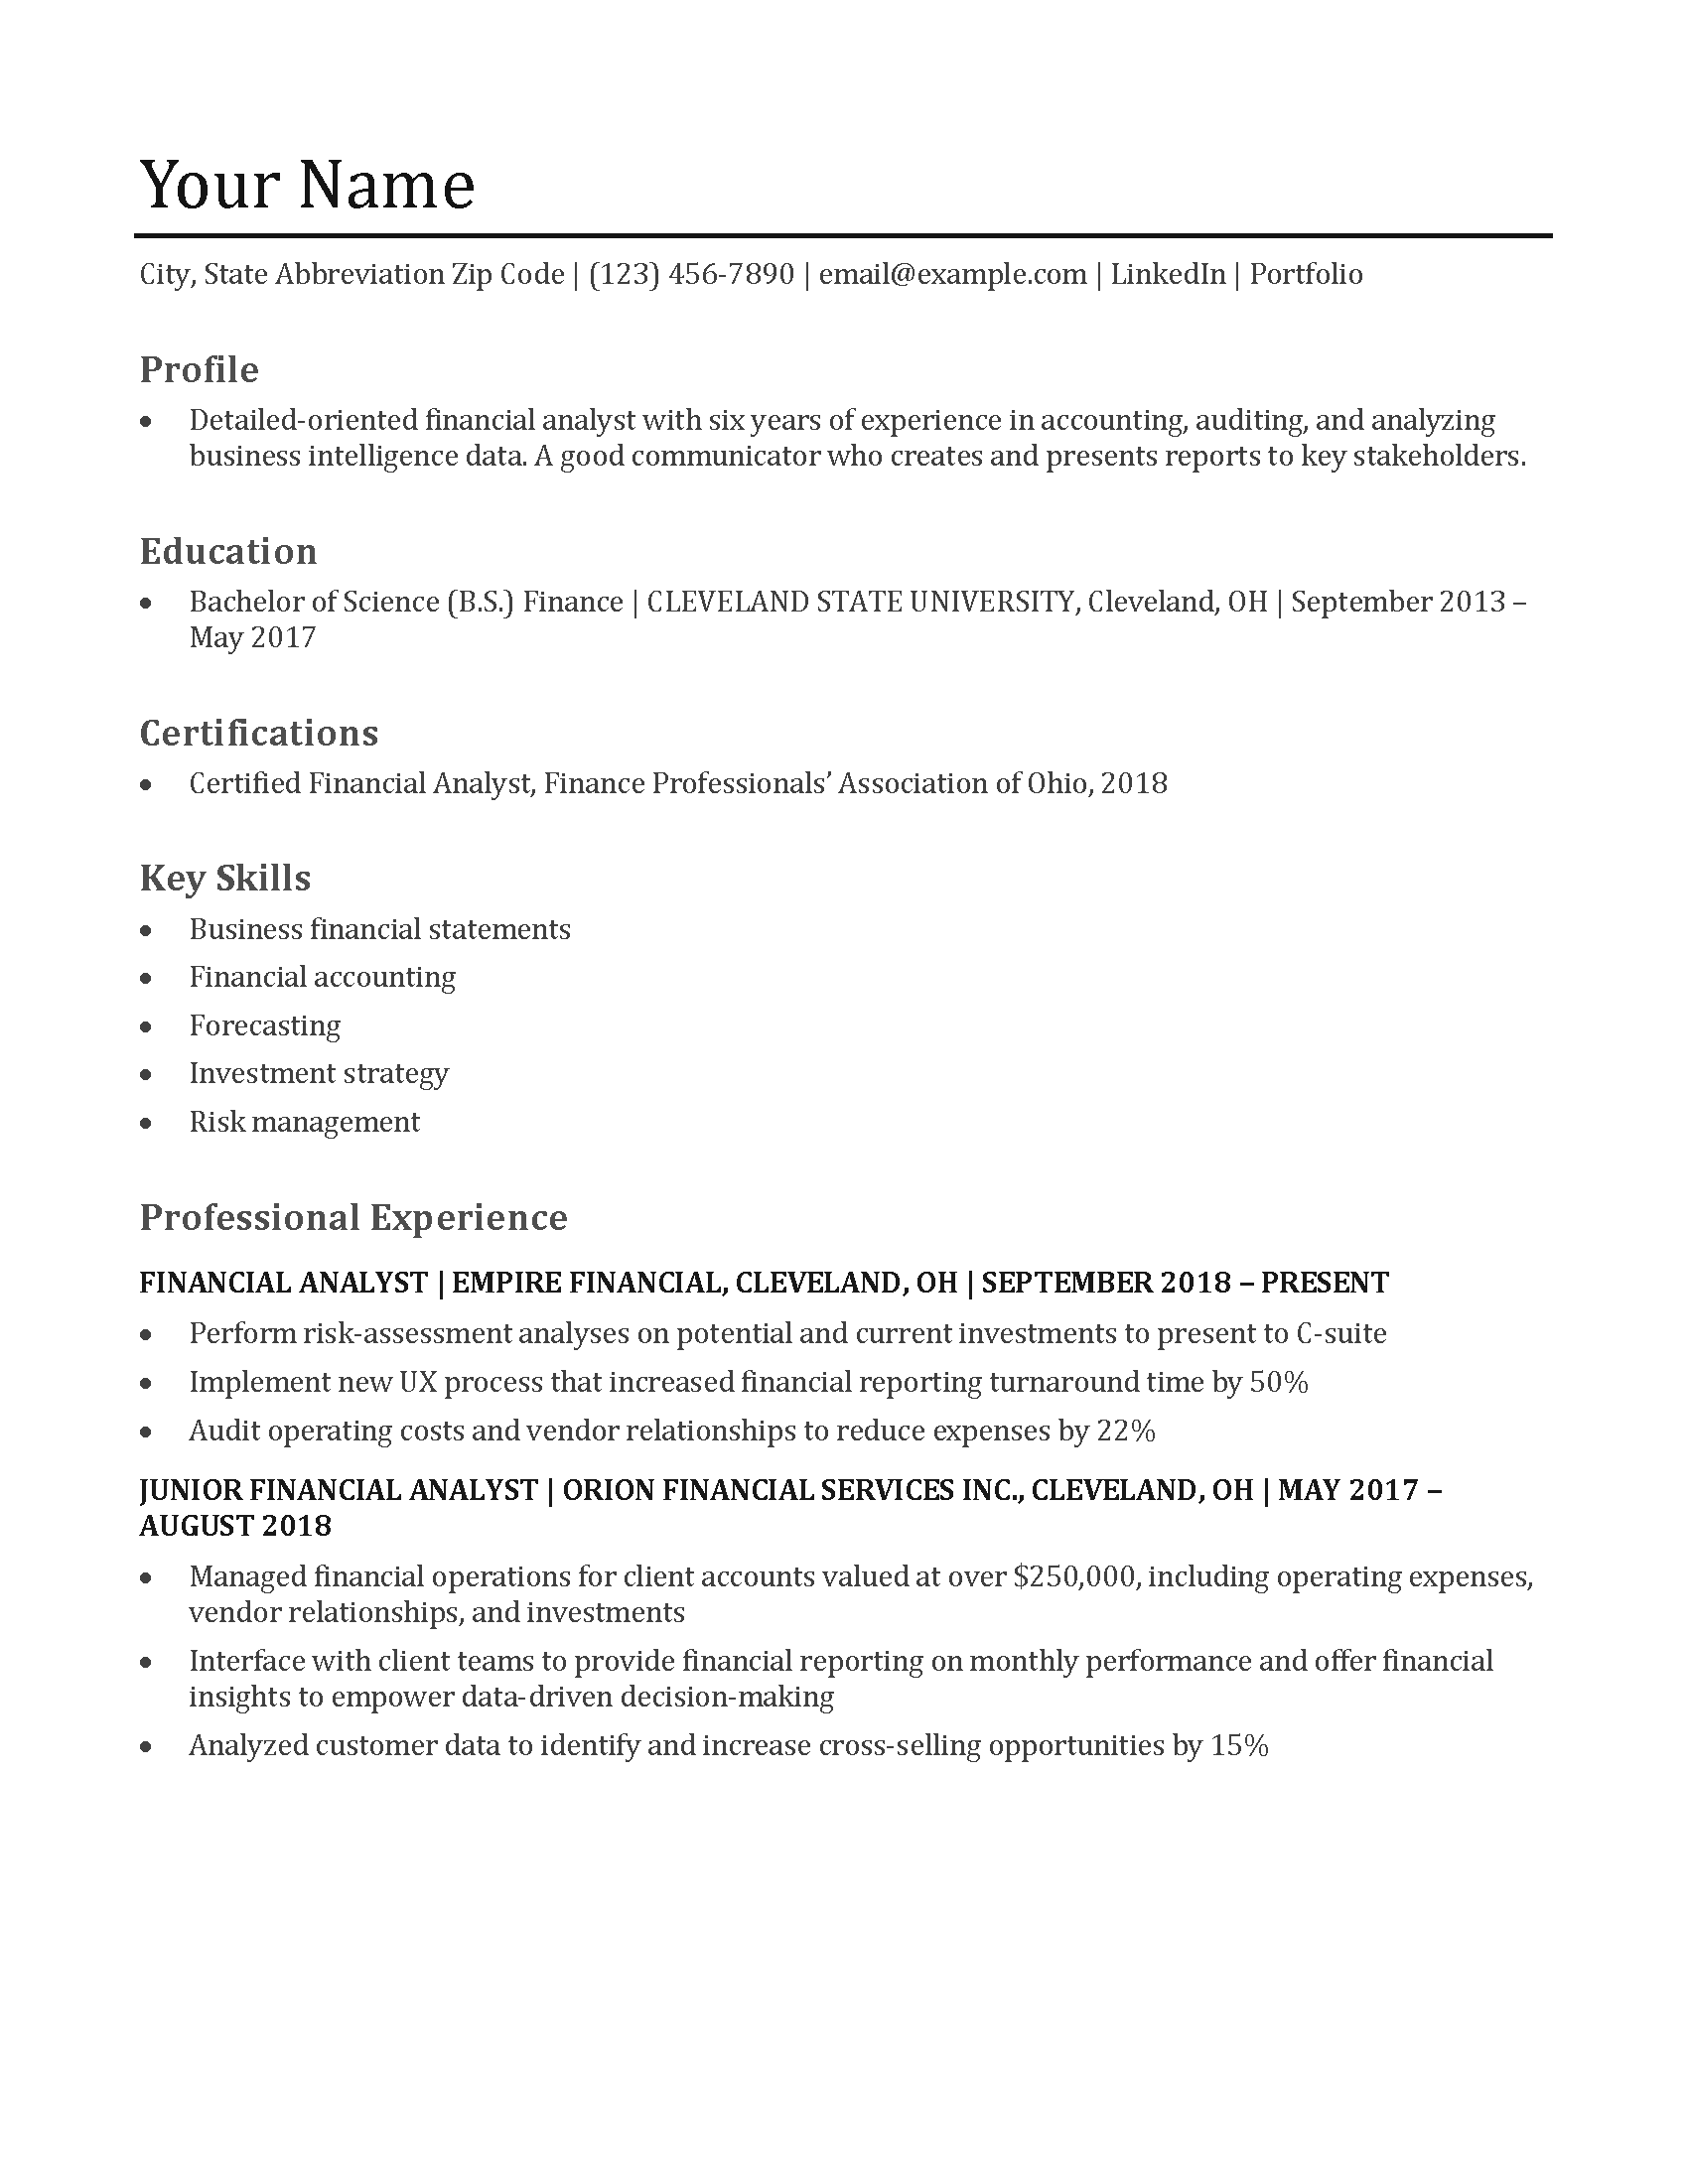 Financial Analyst Resume Example Image